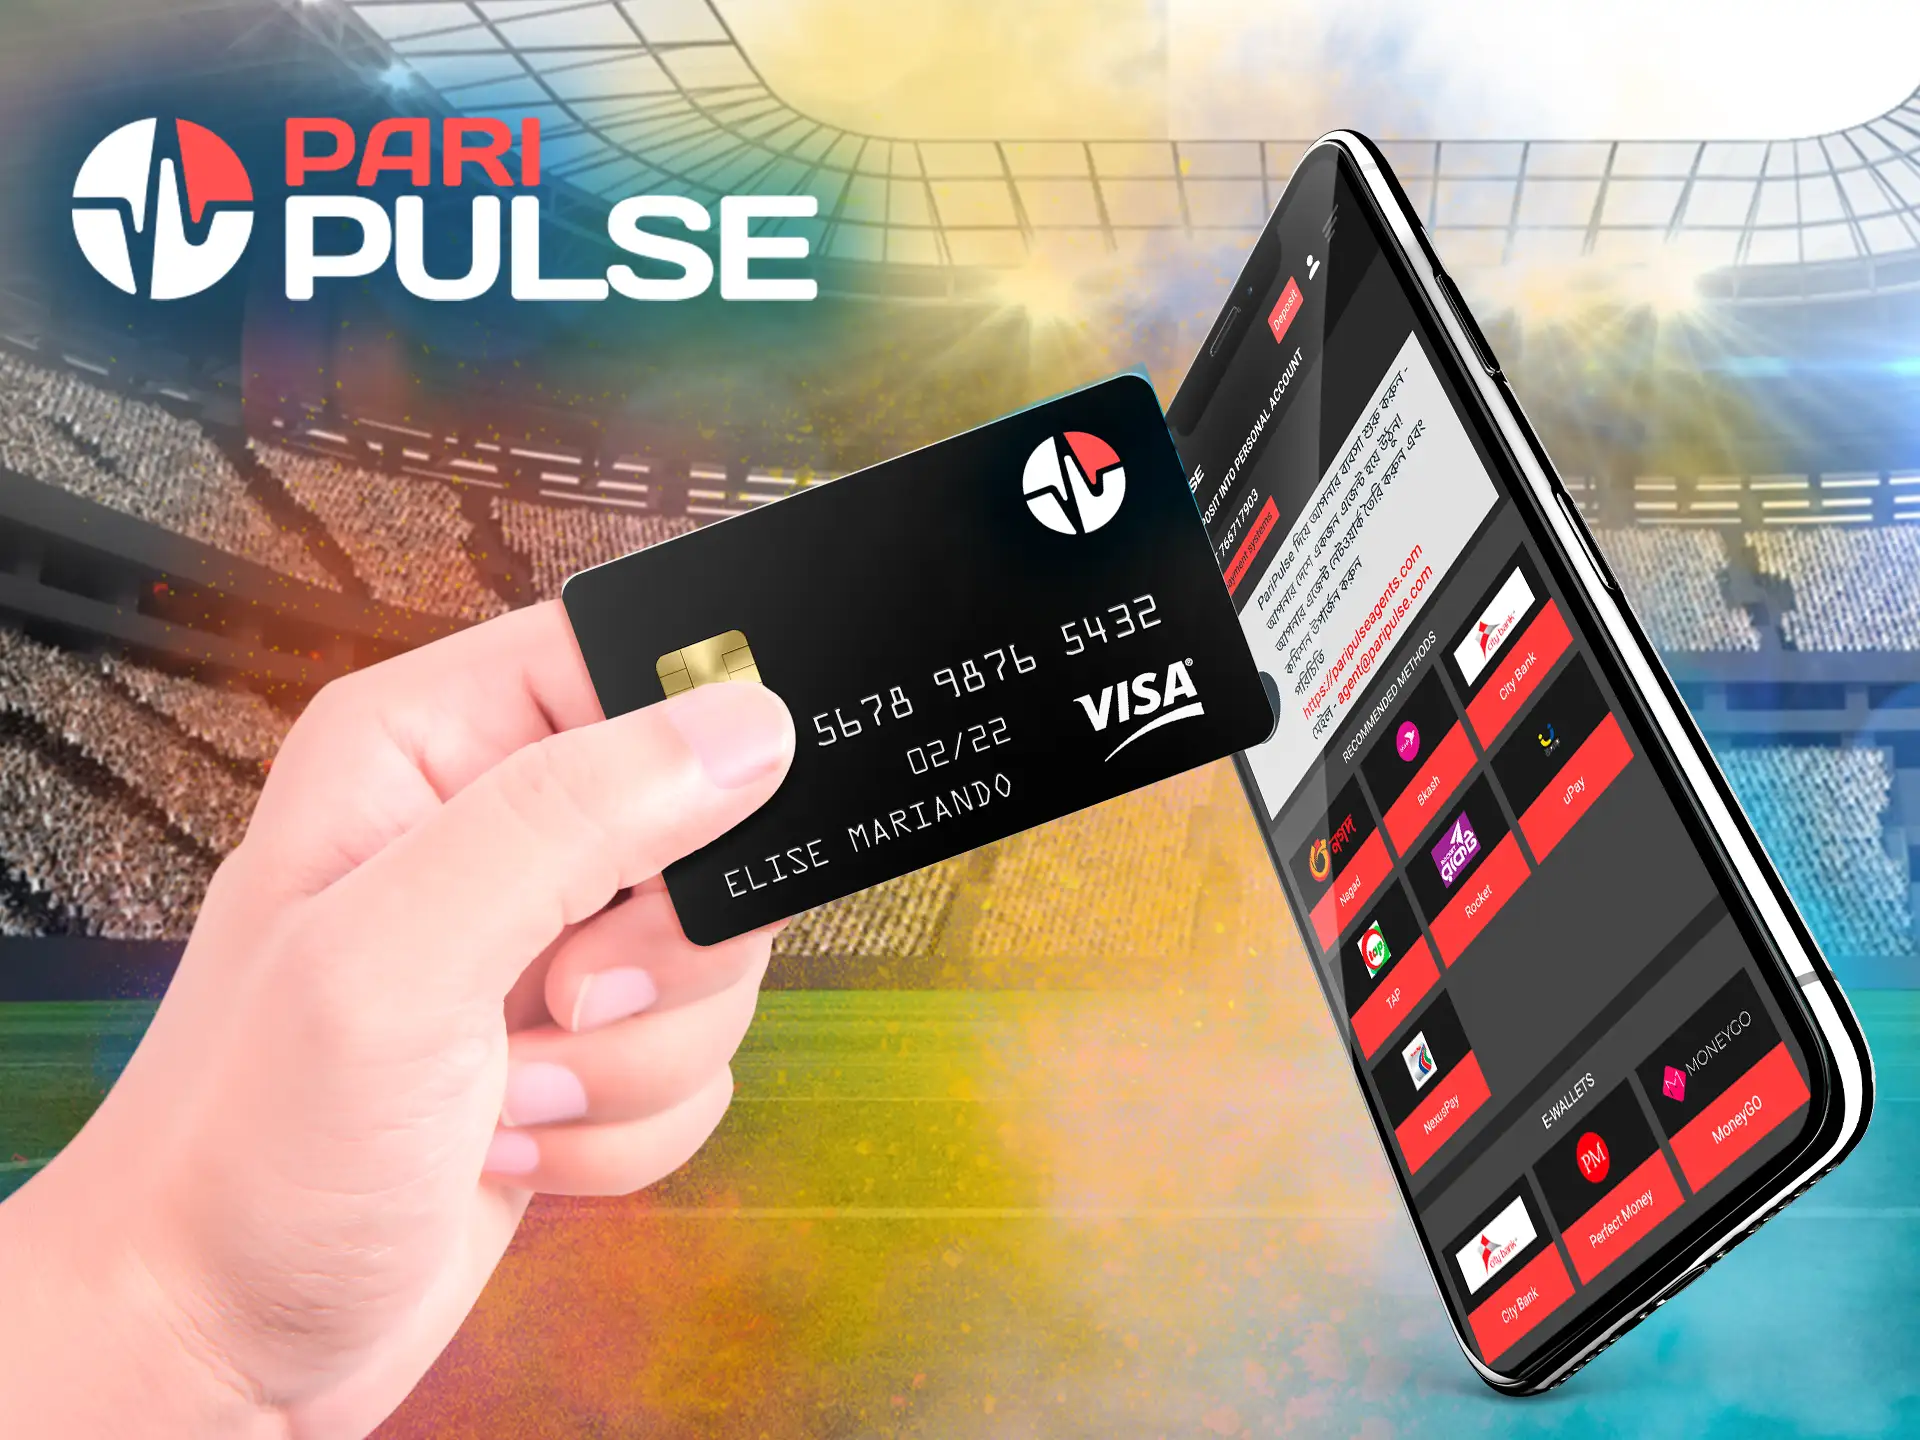 Our simple guide will help players from Bangladesh to deposit and start playing at PariPulse.